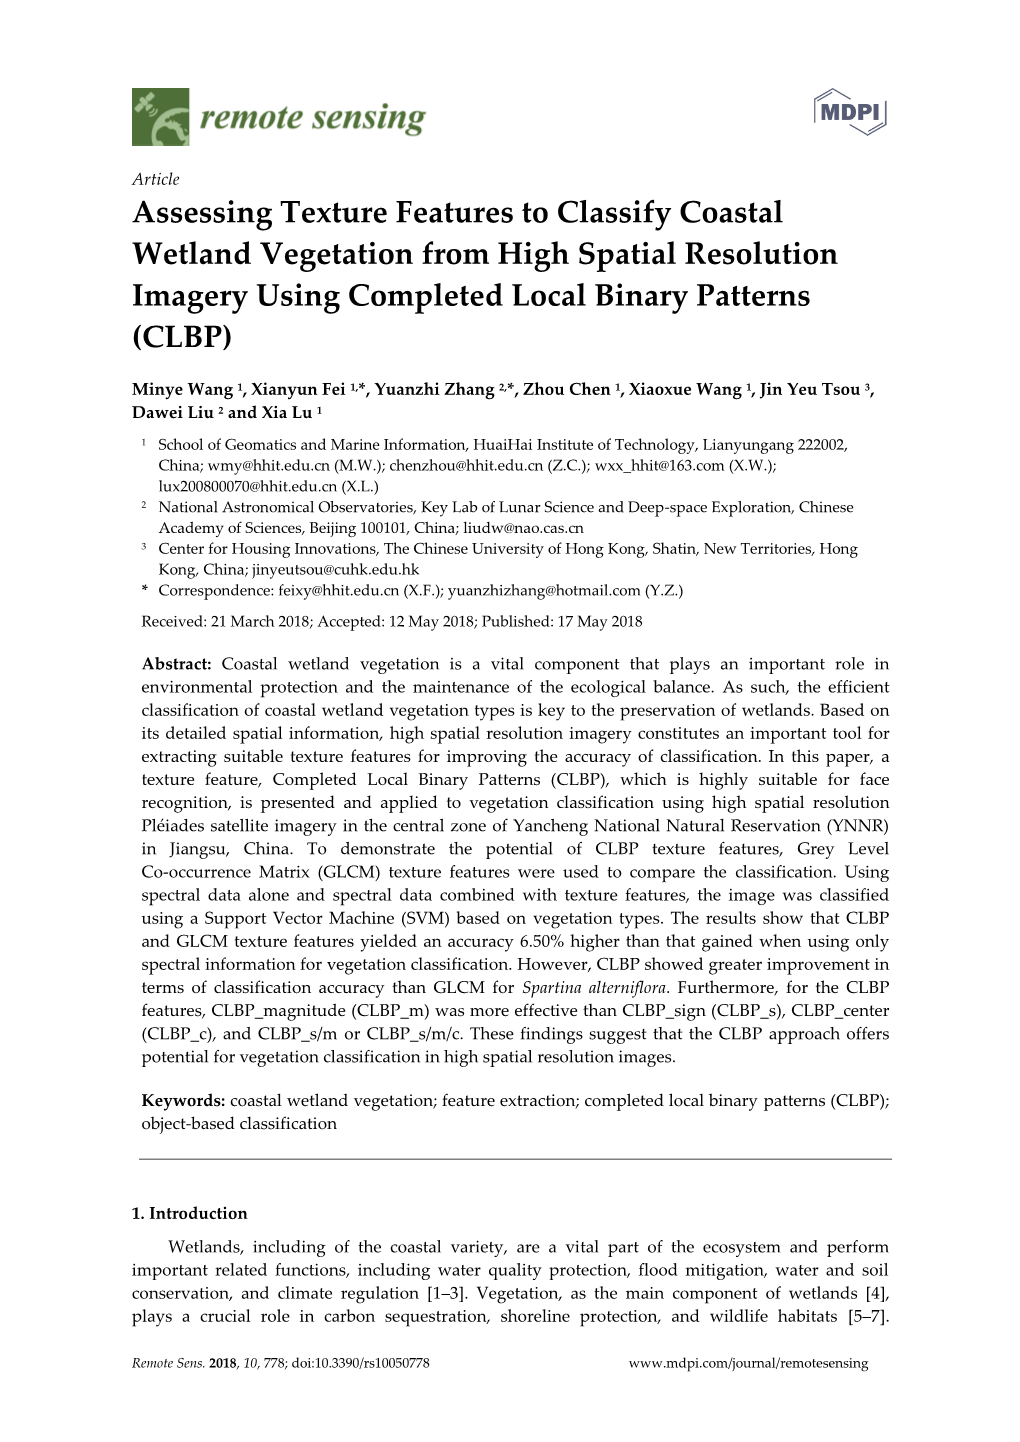 Assessing Texture Features to Classify Coastal Wetland Vegetation from High Spatial Resolution Imagery Using Completed Local Binary Patterns (CLBP)